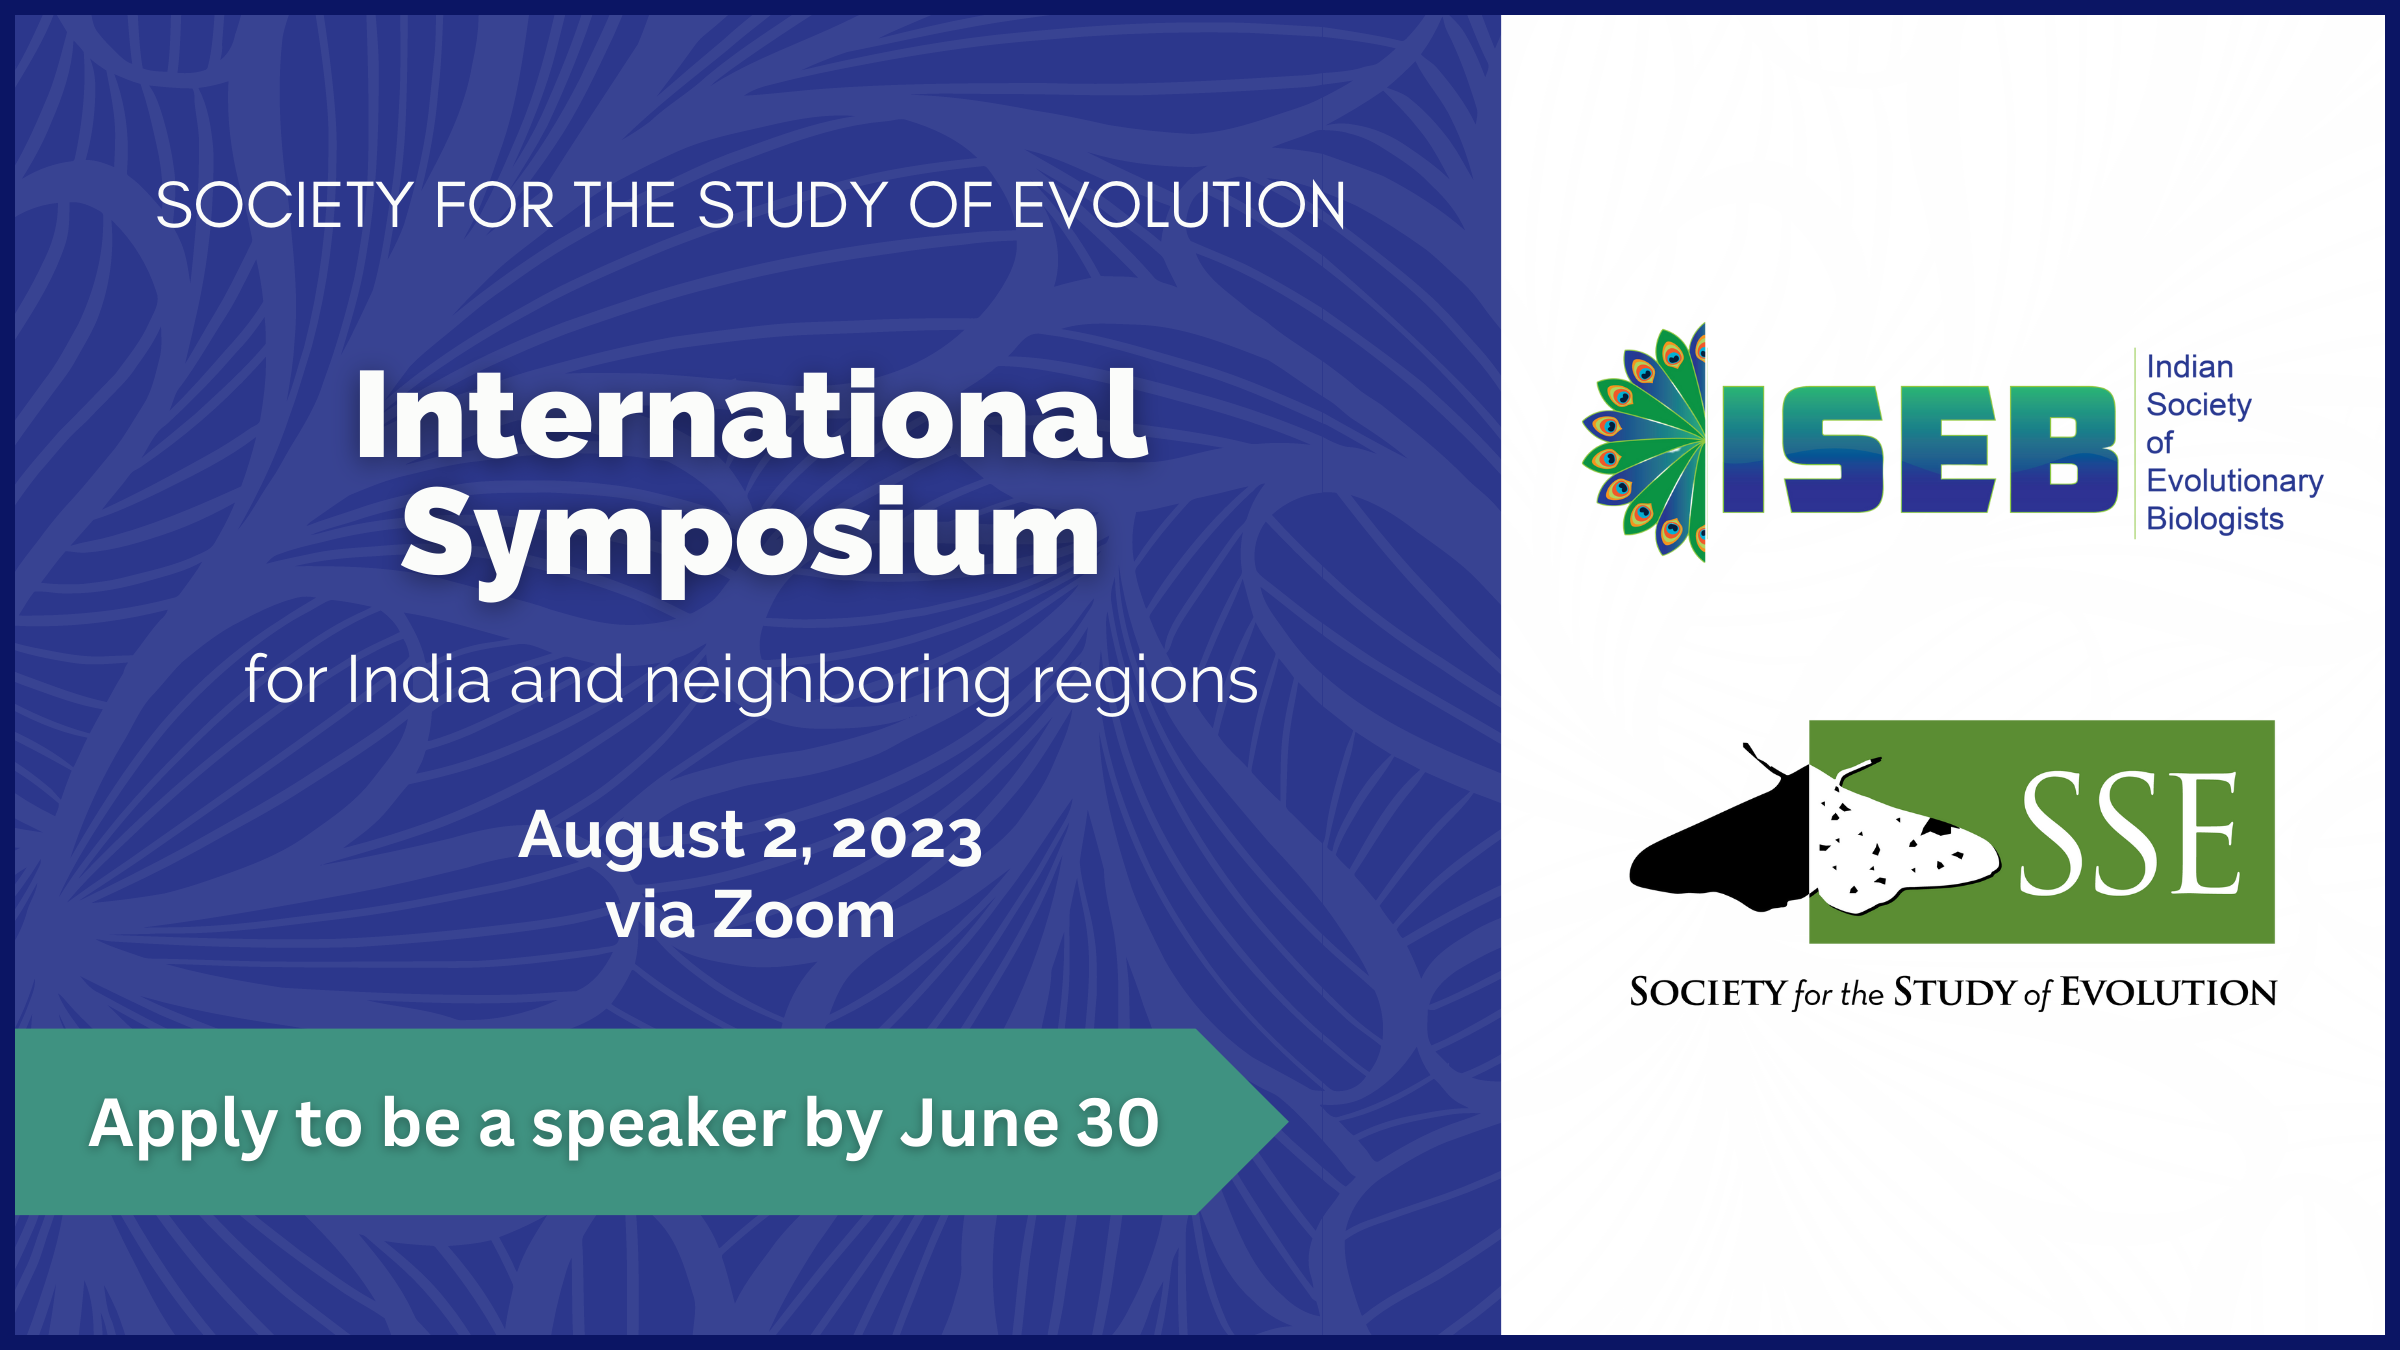 Text: Society for the Study of Evolution International Symposium for India and neighboring regions, August 2, 2023 via Zoom. Apply to be a speaker by June 30. Logos for ISEB and SSE.